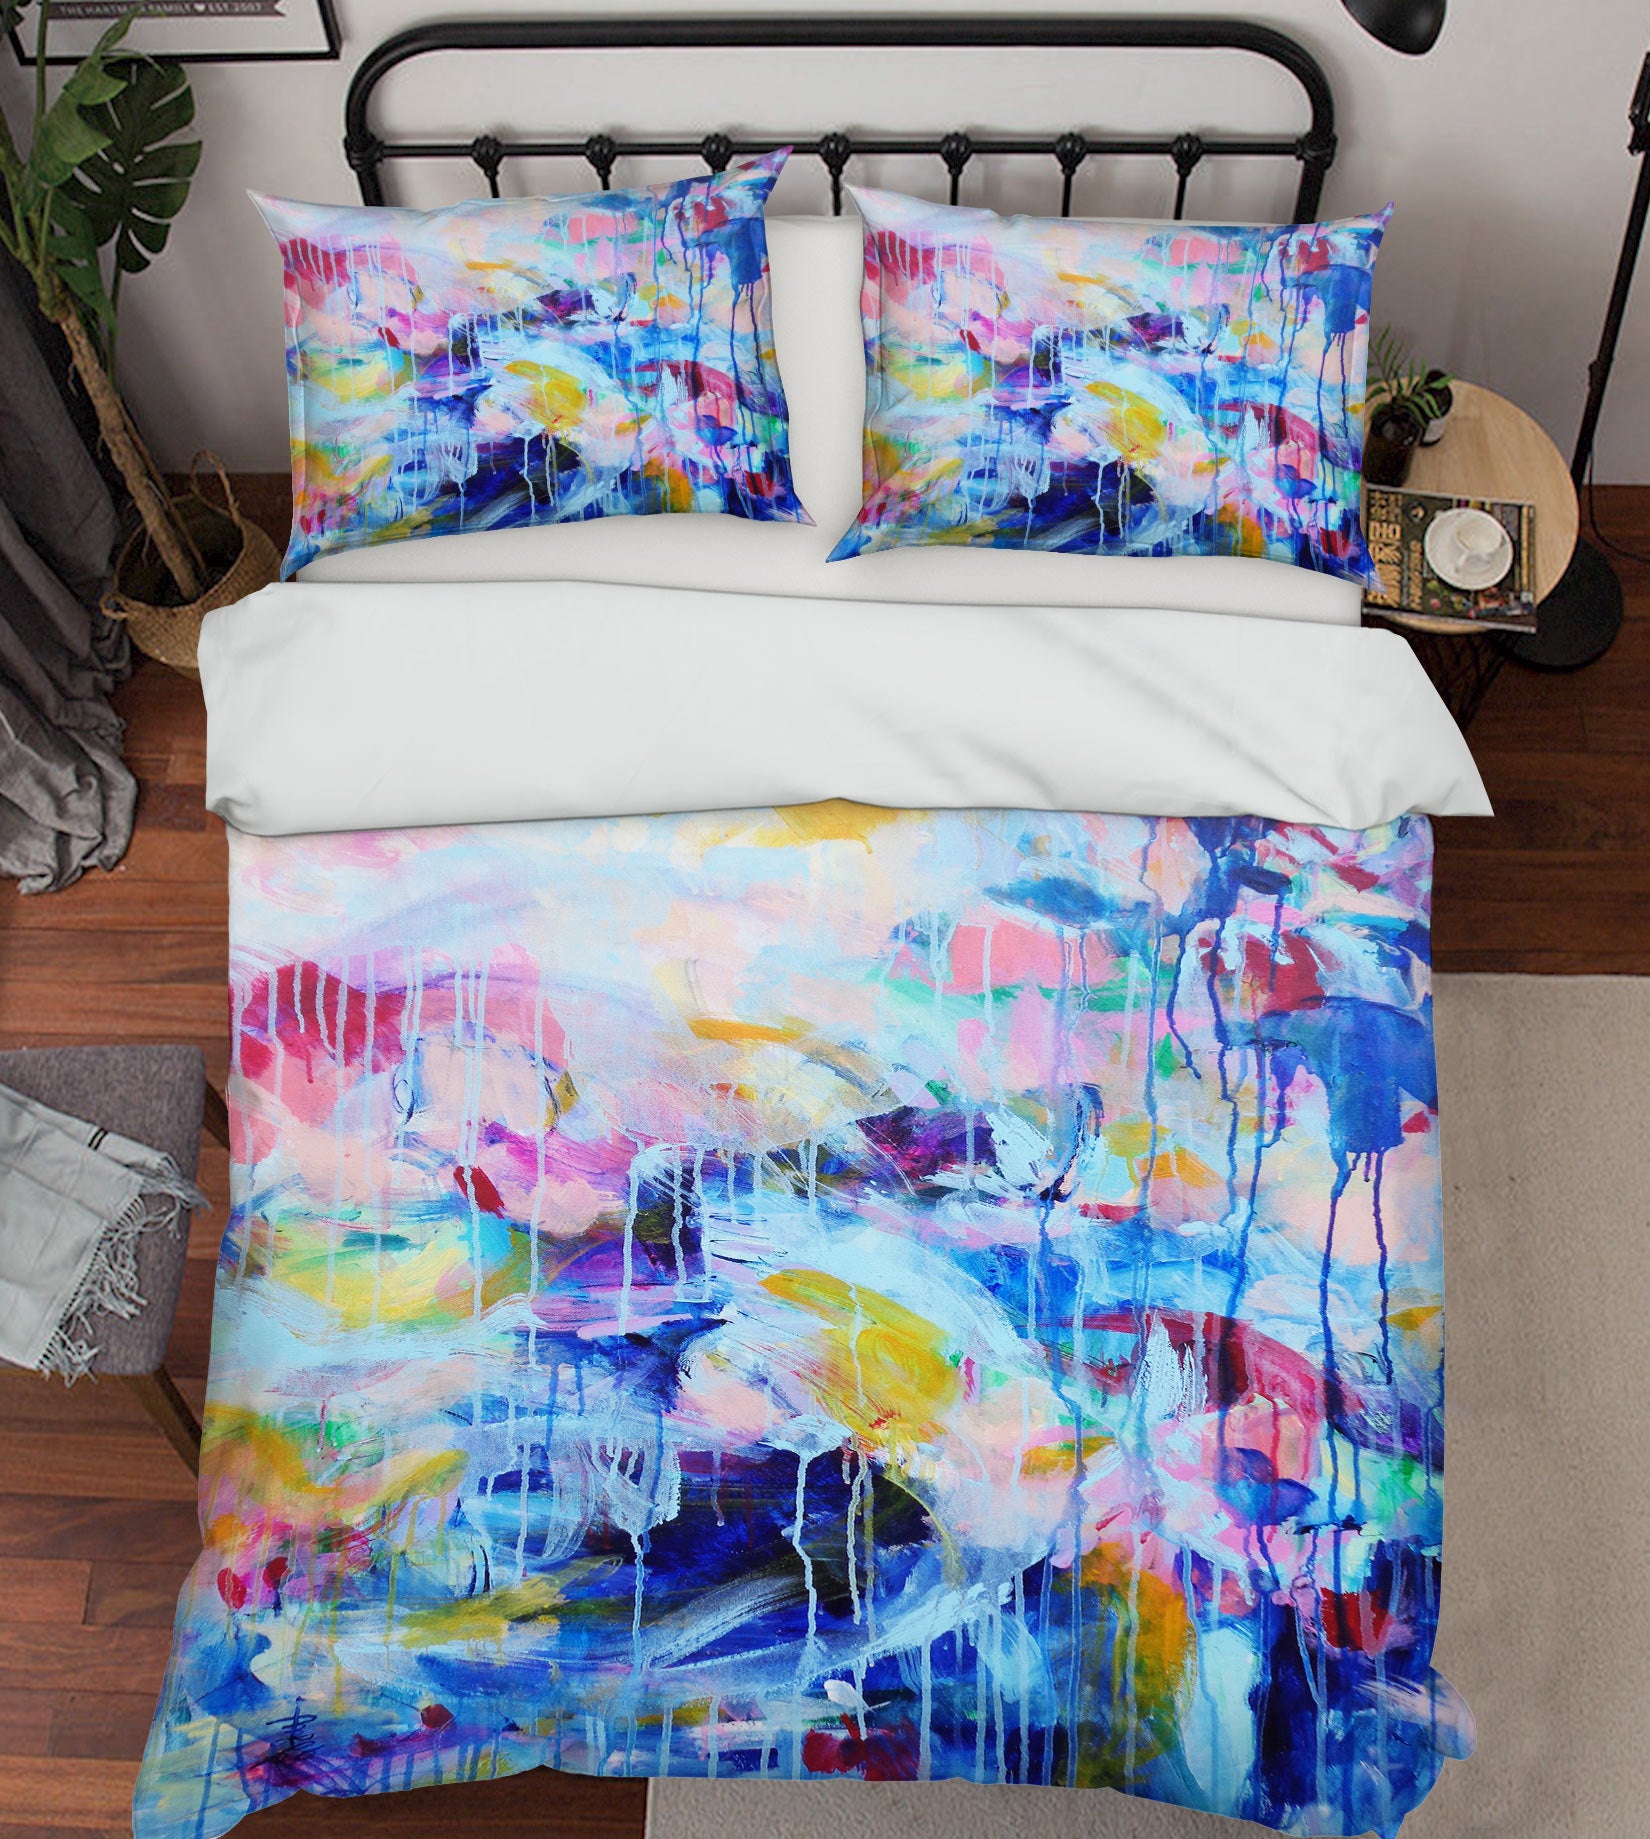 3D Colorful Watercolor 1124 Misako Chida Bedding Bed Pillowcases Quilt